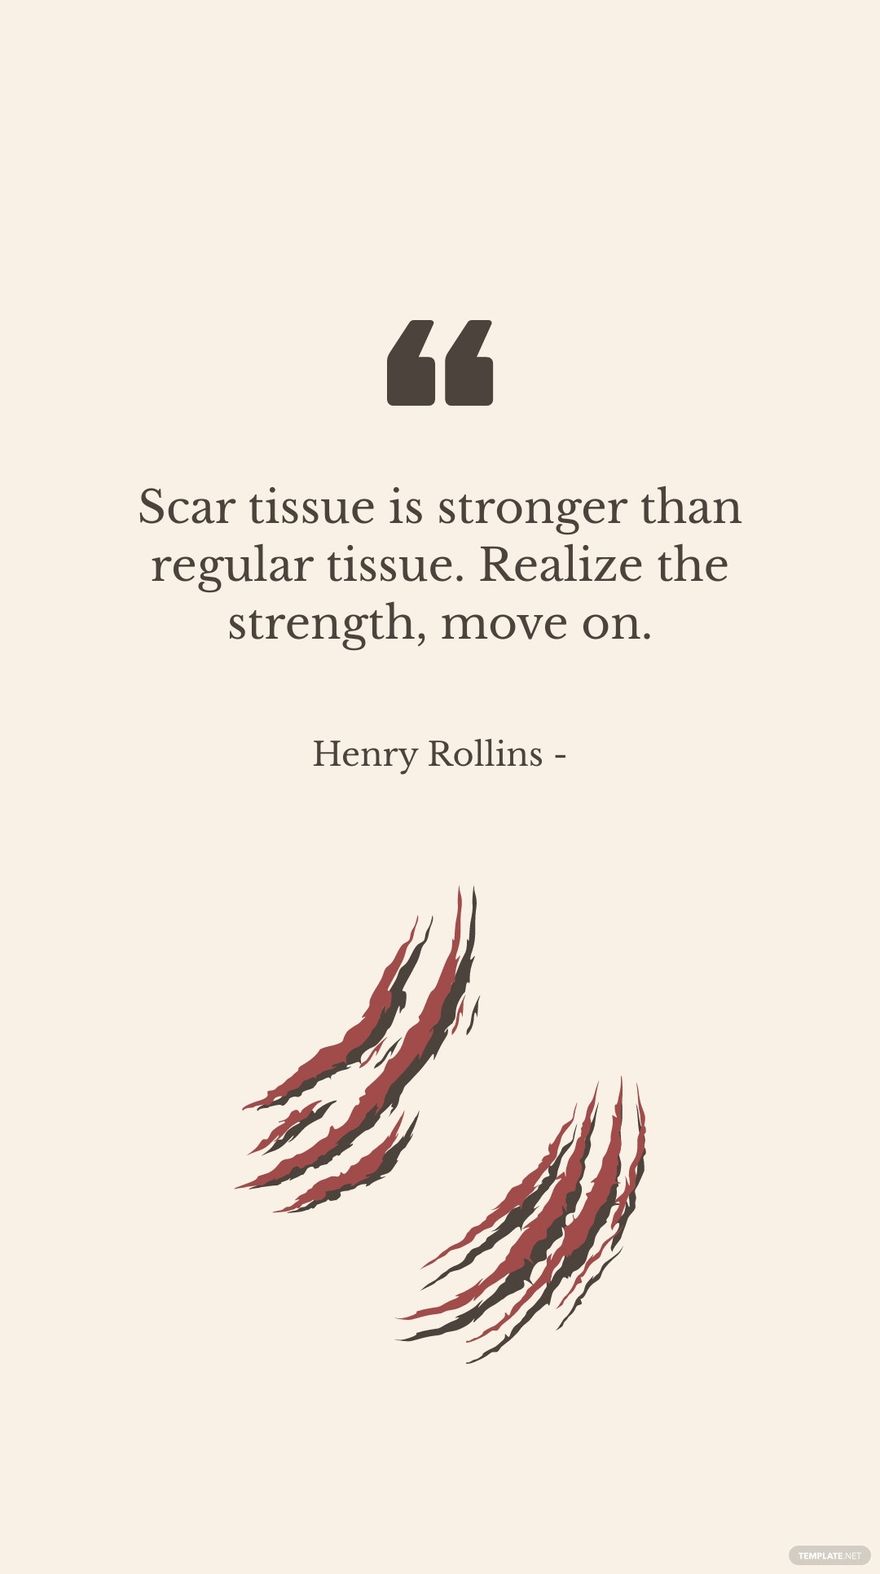 Henry Rollins - Scar tissue is stronger than regular tissue. Realize the strength, move on. in JPG